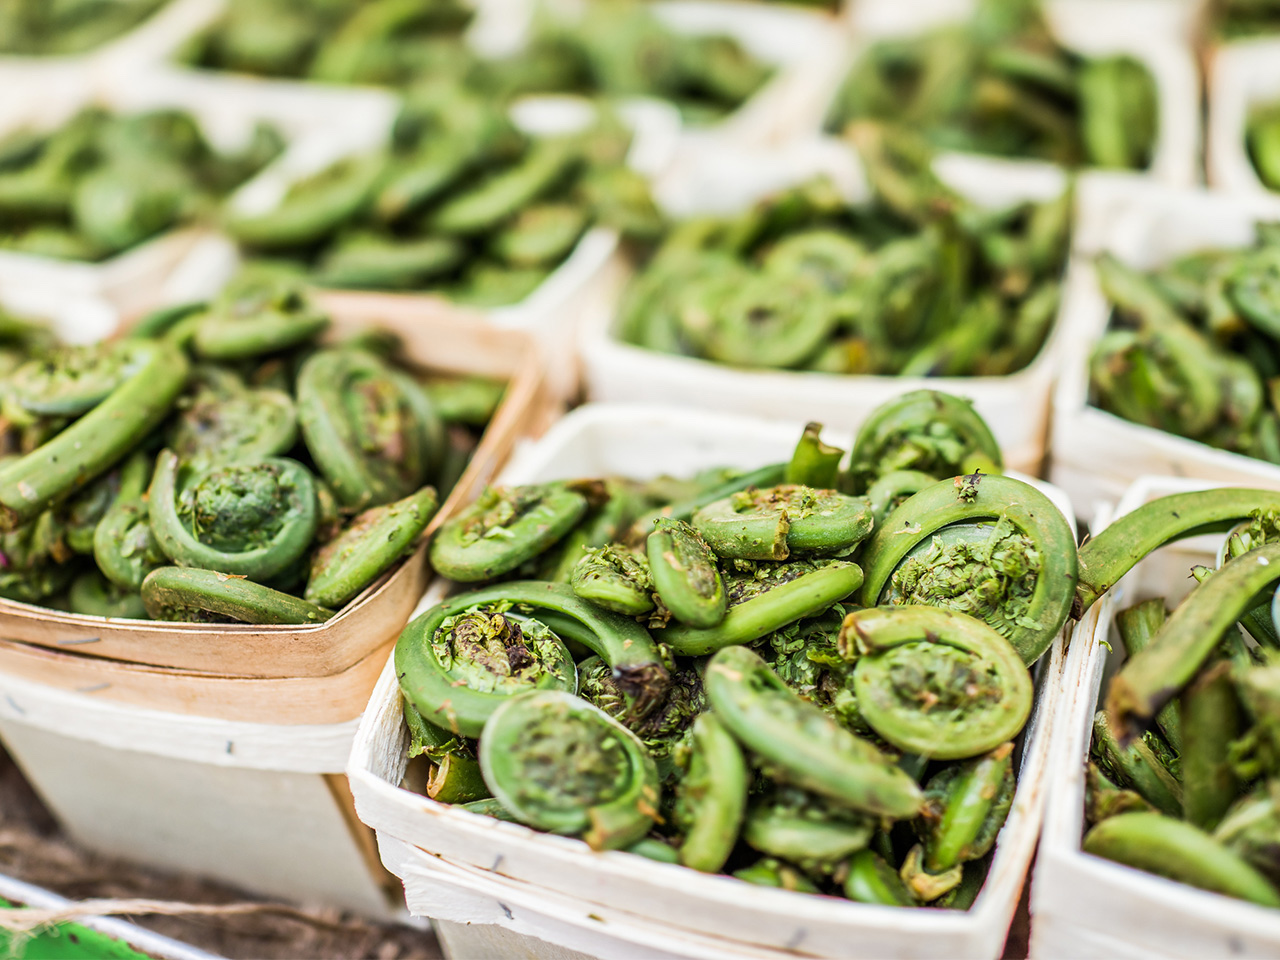 How to cook fiddleheads safely